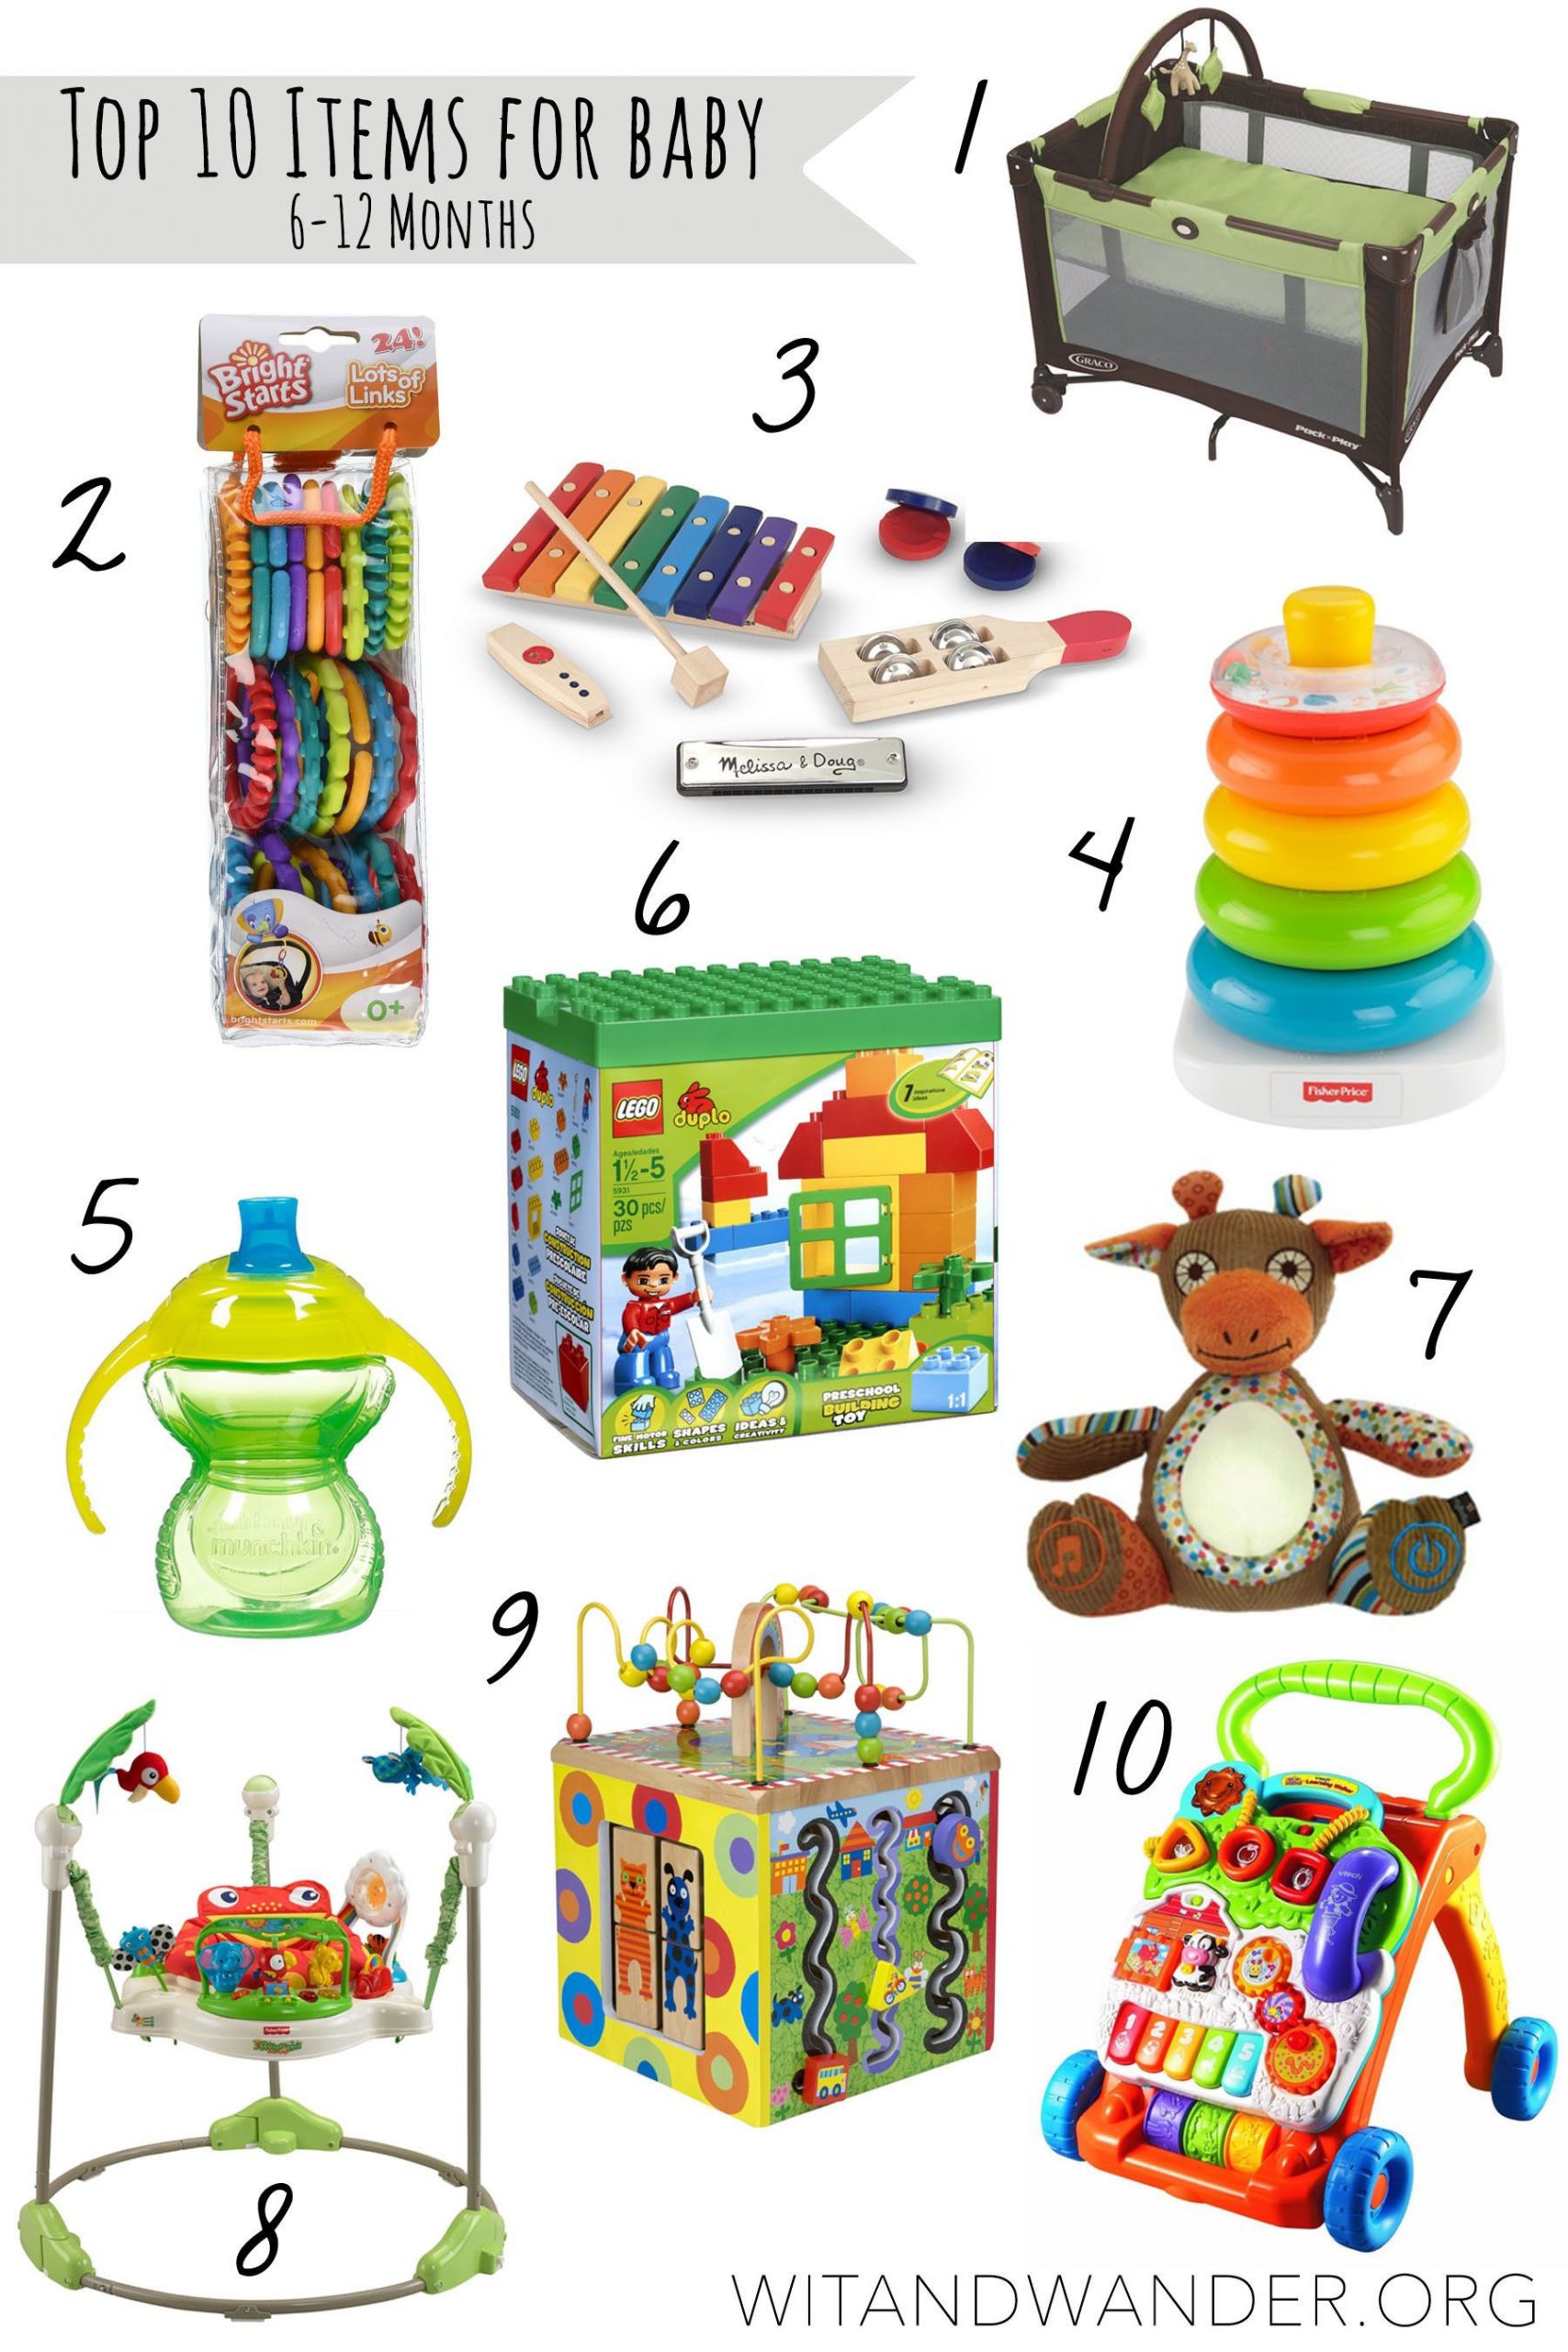 One Year Old Christmas Gift
 Top 10 Must Haves for Babies 6 12 Month Old